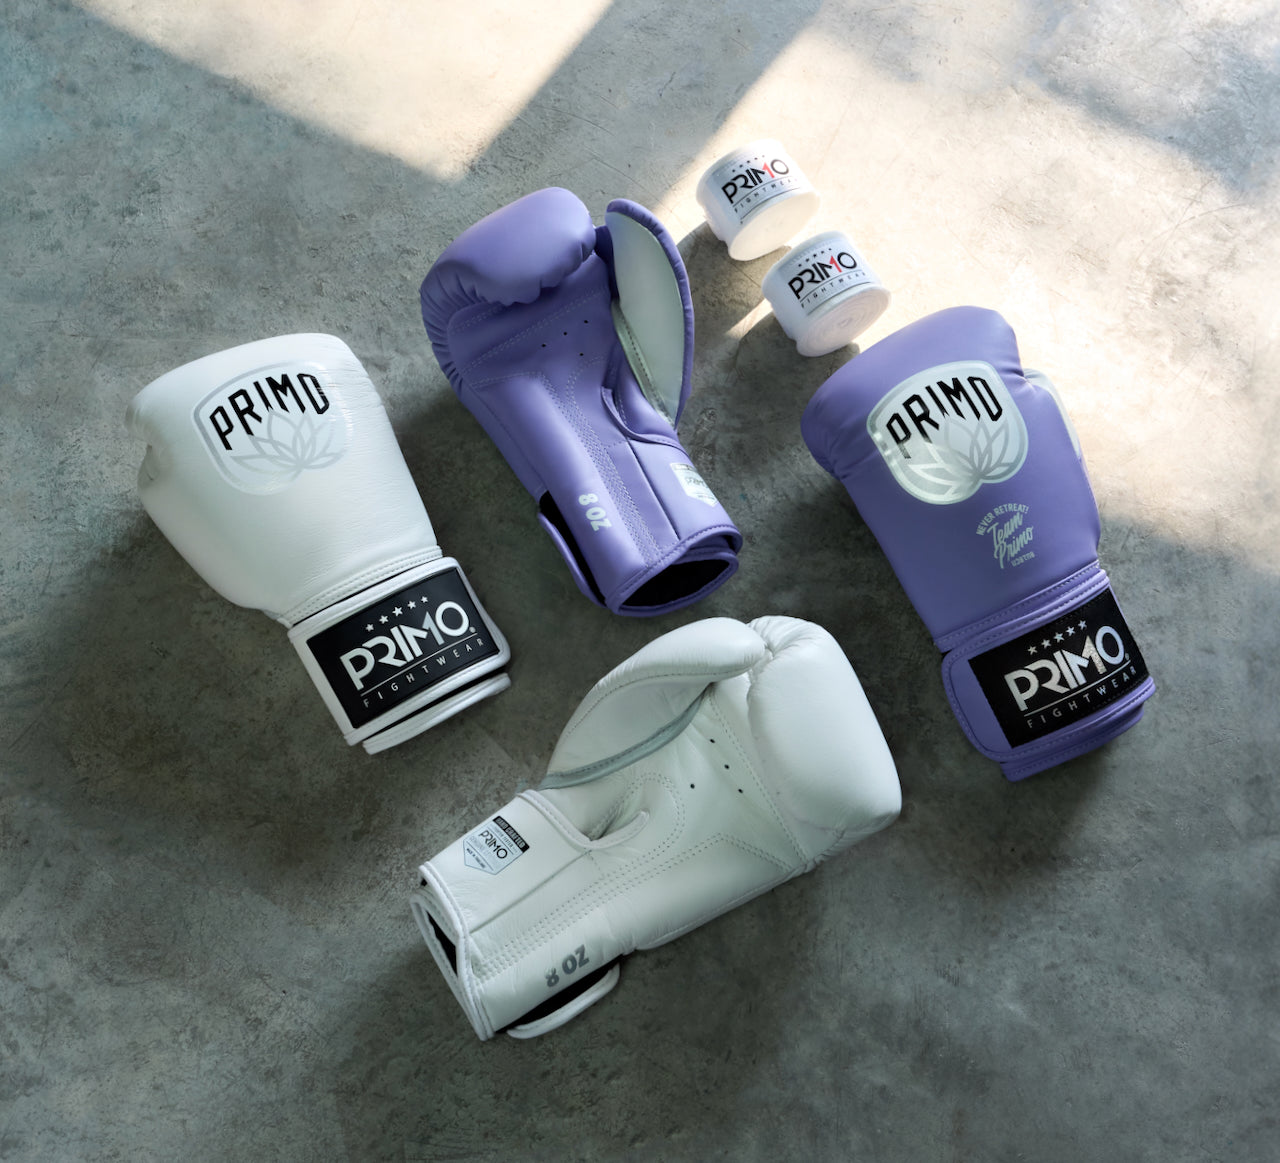 CHOOSING THE PERFECT PAIR OF BOXING GLOVES